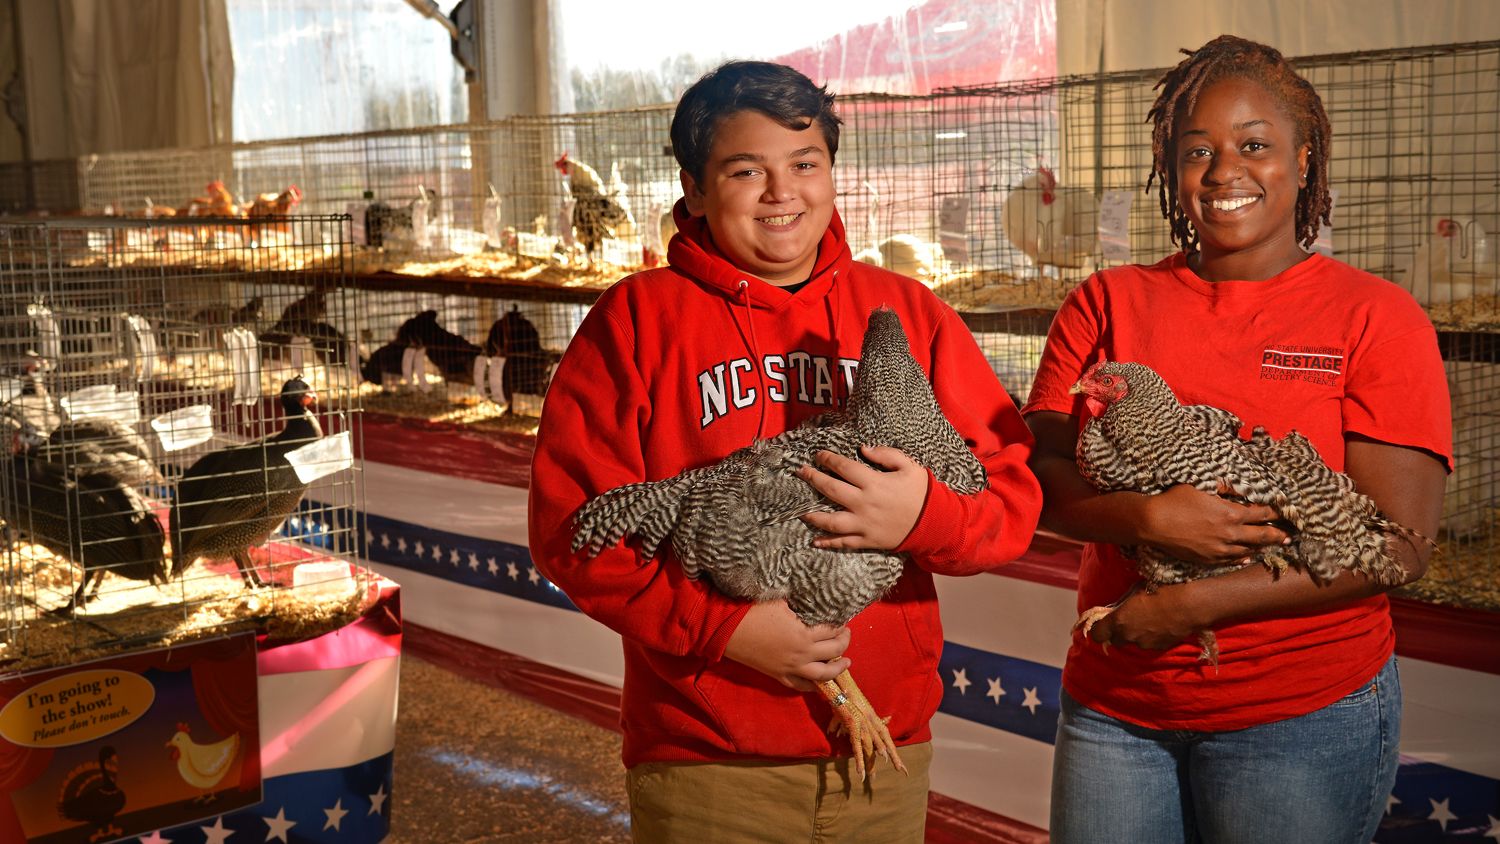 4-H high school student and a Prestage Department of Poultry Science student with chickens at the North Carolina State Fair.